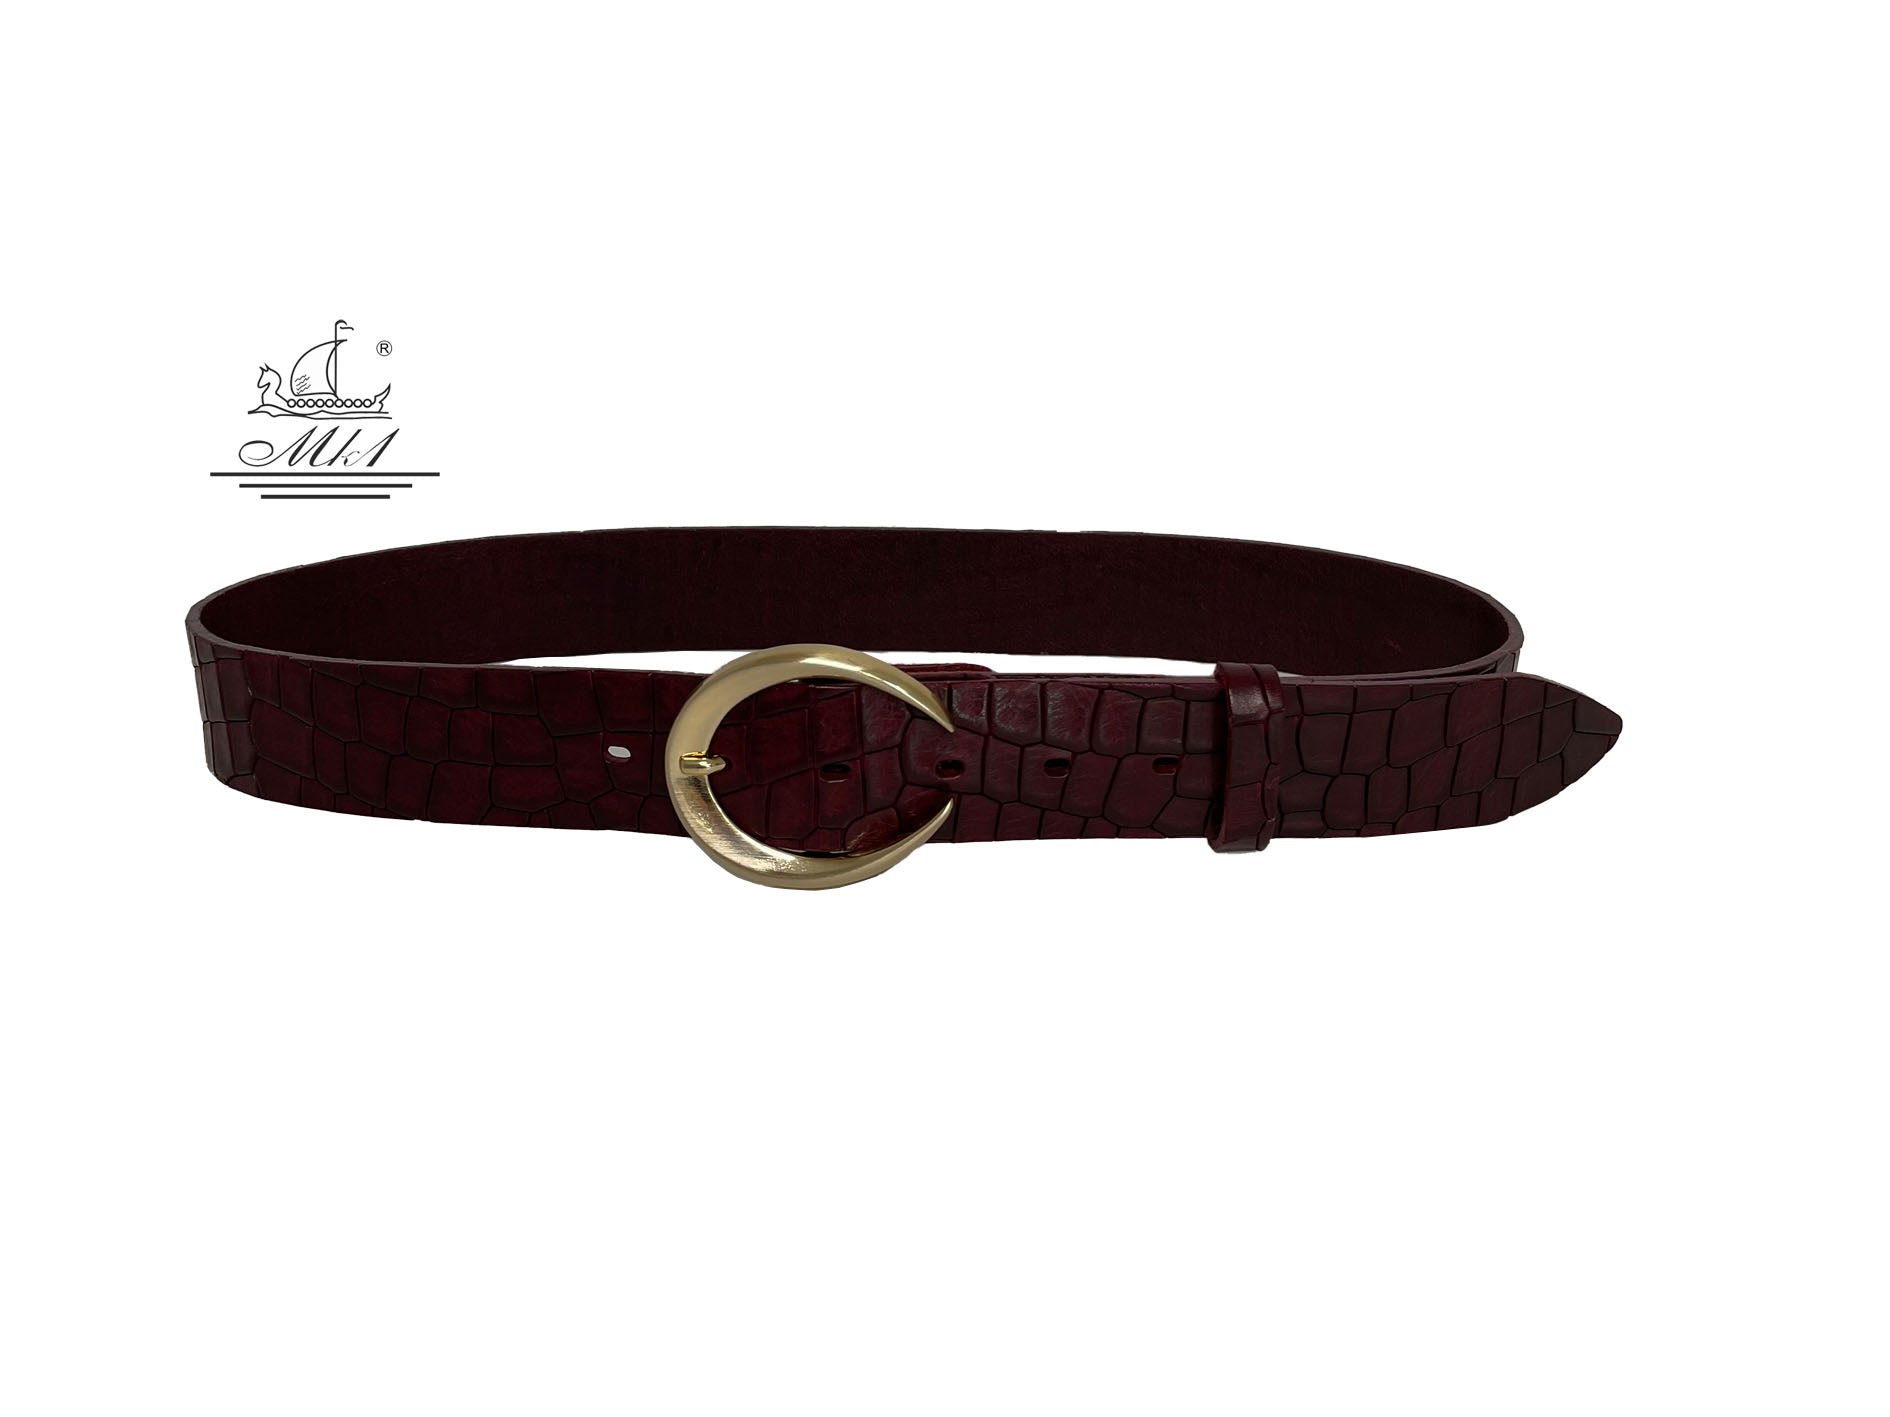 Unisex 4cm wide belt handcrafted from burgundy leather with croco design. 101589/40BG/KR